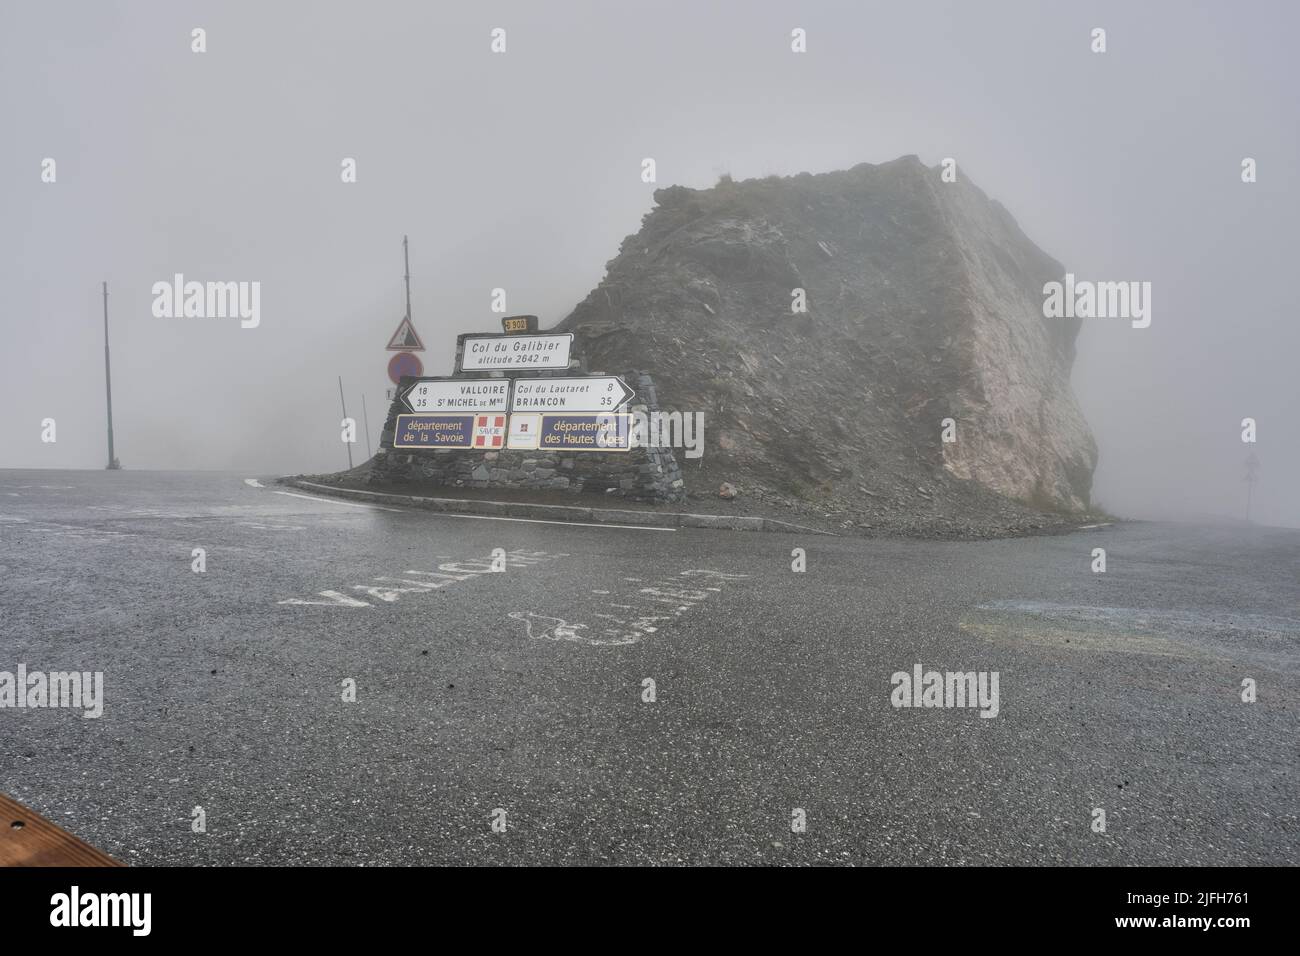 Road sign of Col de Galibier in the mist, stage on the tour de france in the french alps Stock Photo